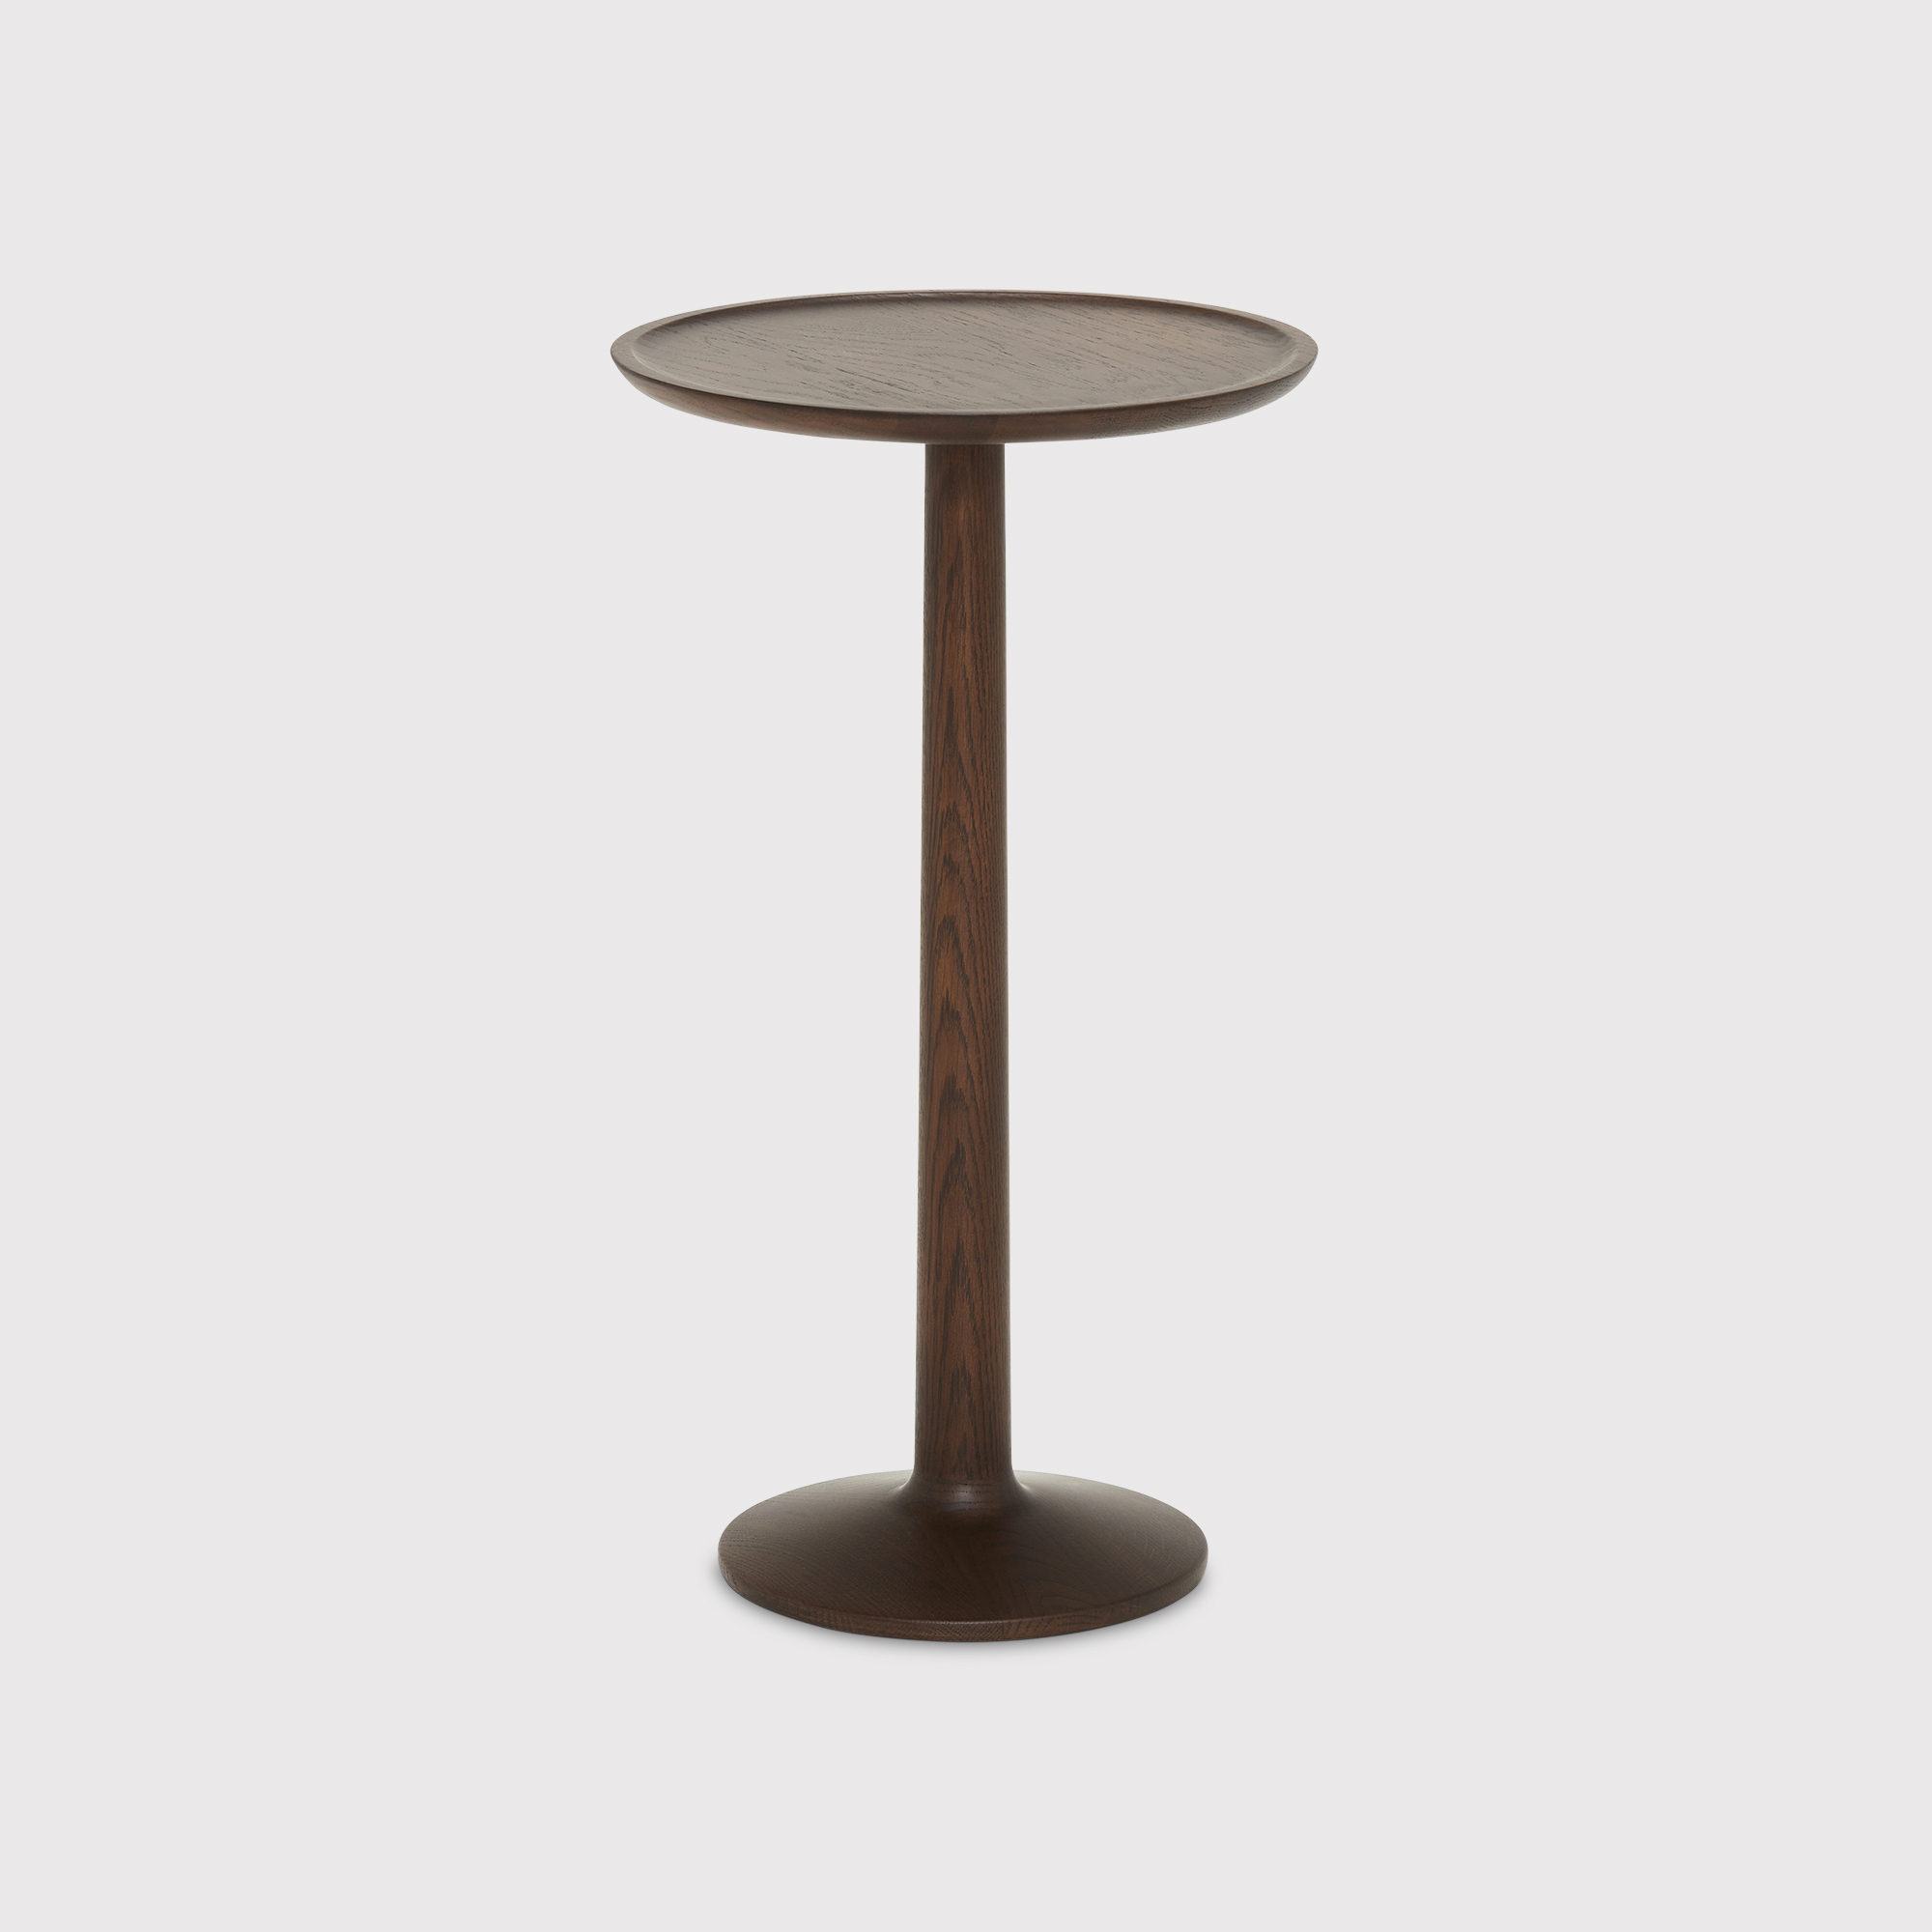 Ercol Siena High Side Table, Round, Brown | Barker & Stonehouse